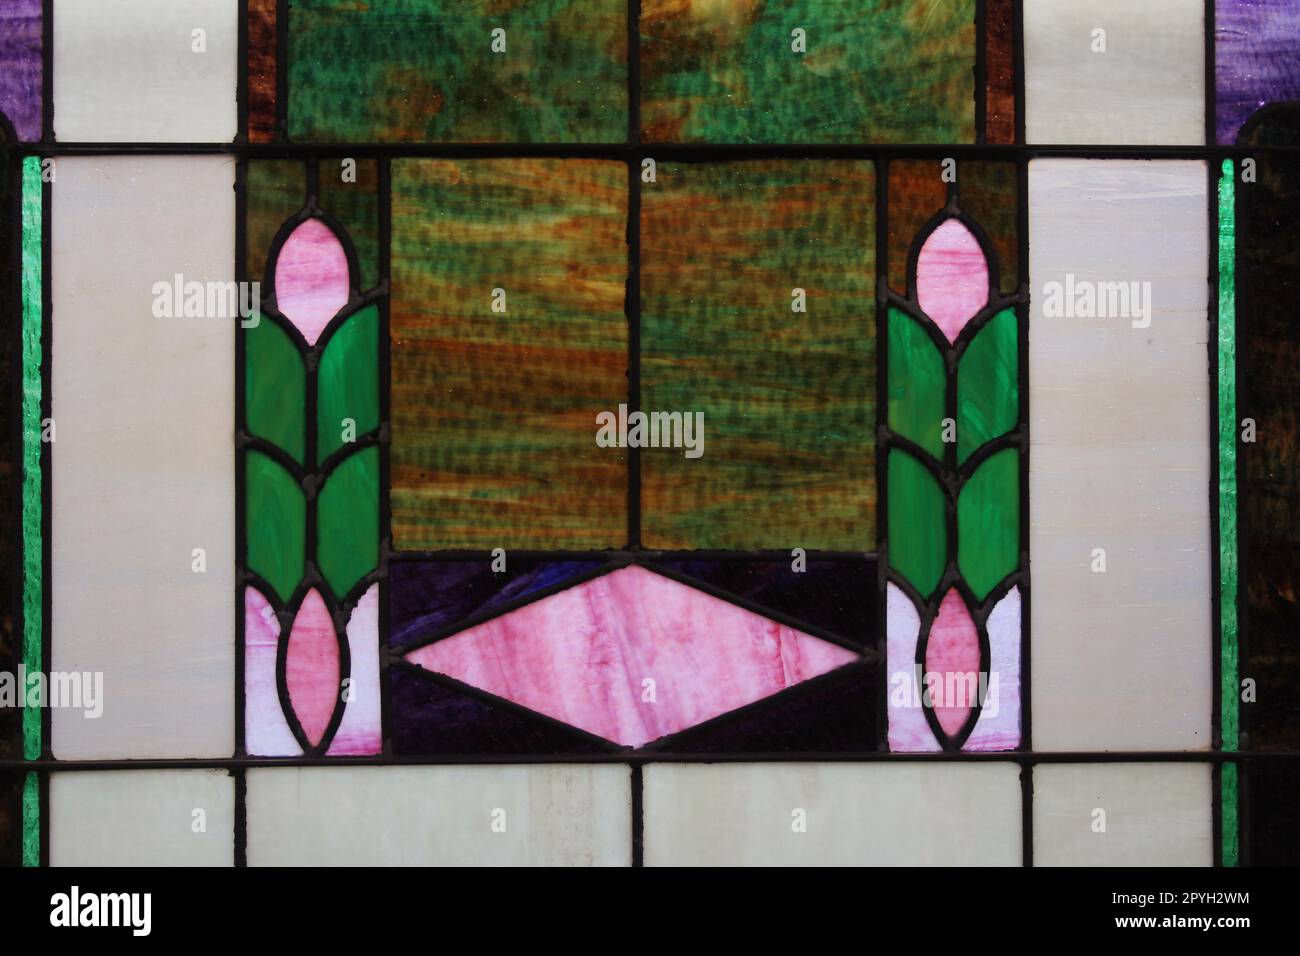 Antique Colorful Glass Panels Photo Composite Stained Glass Window Design Stock Photo